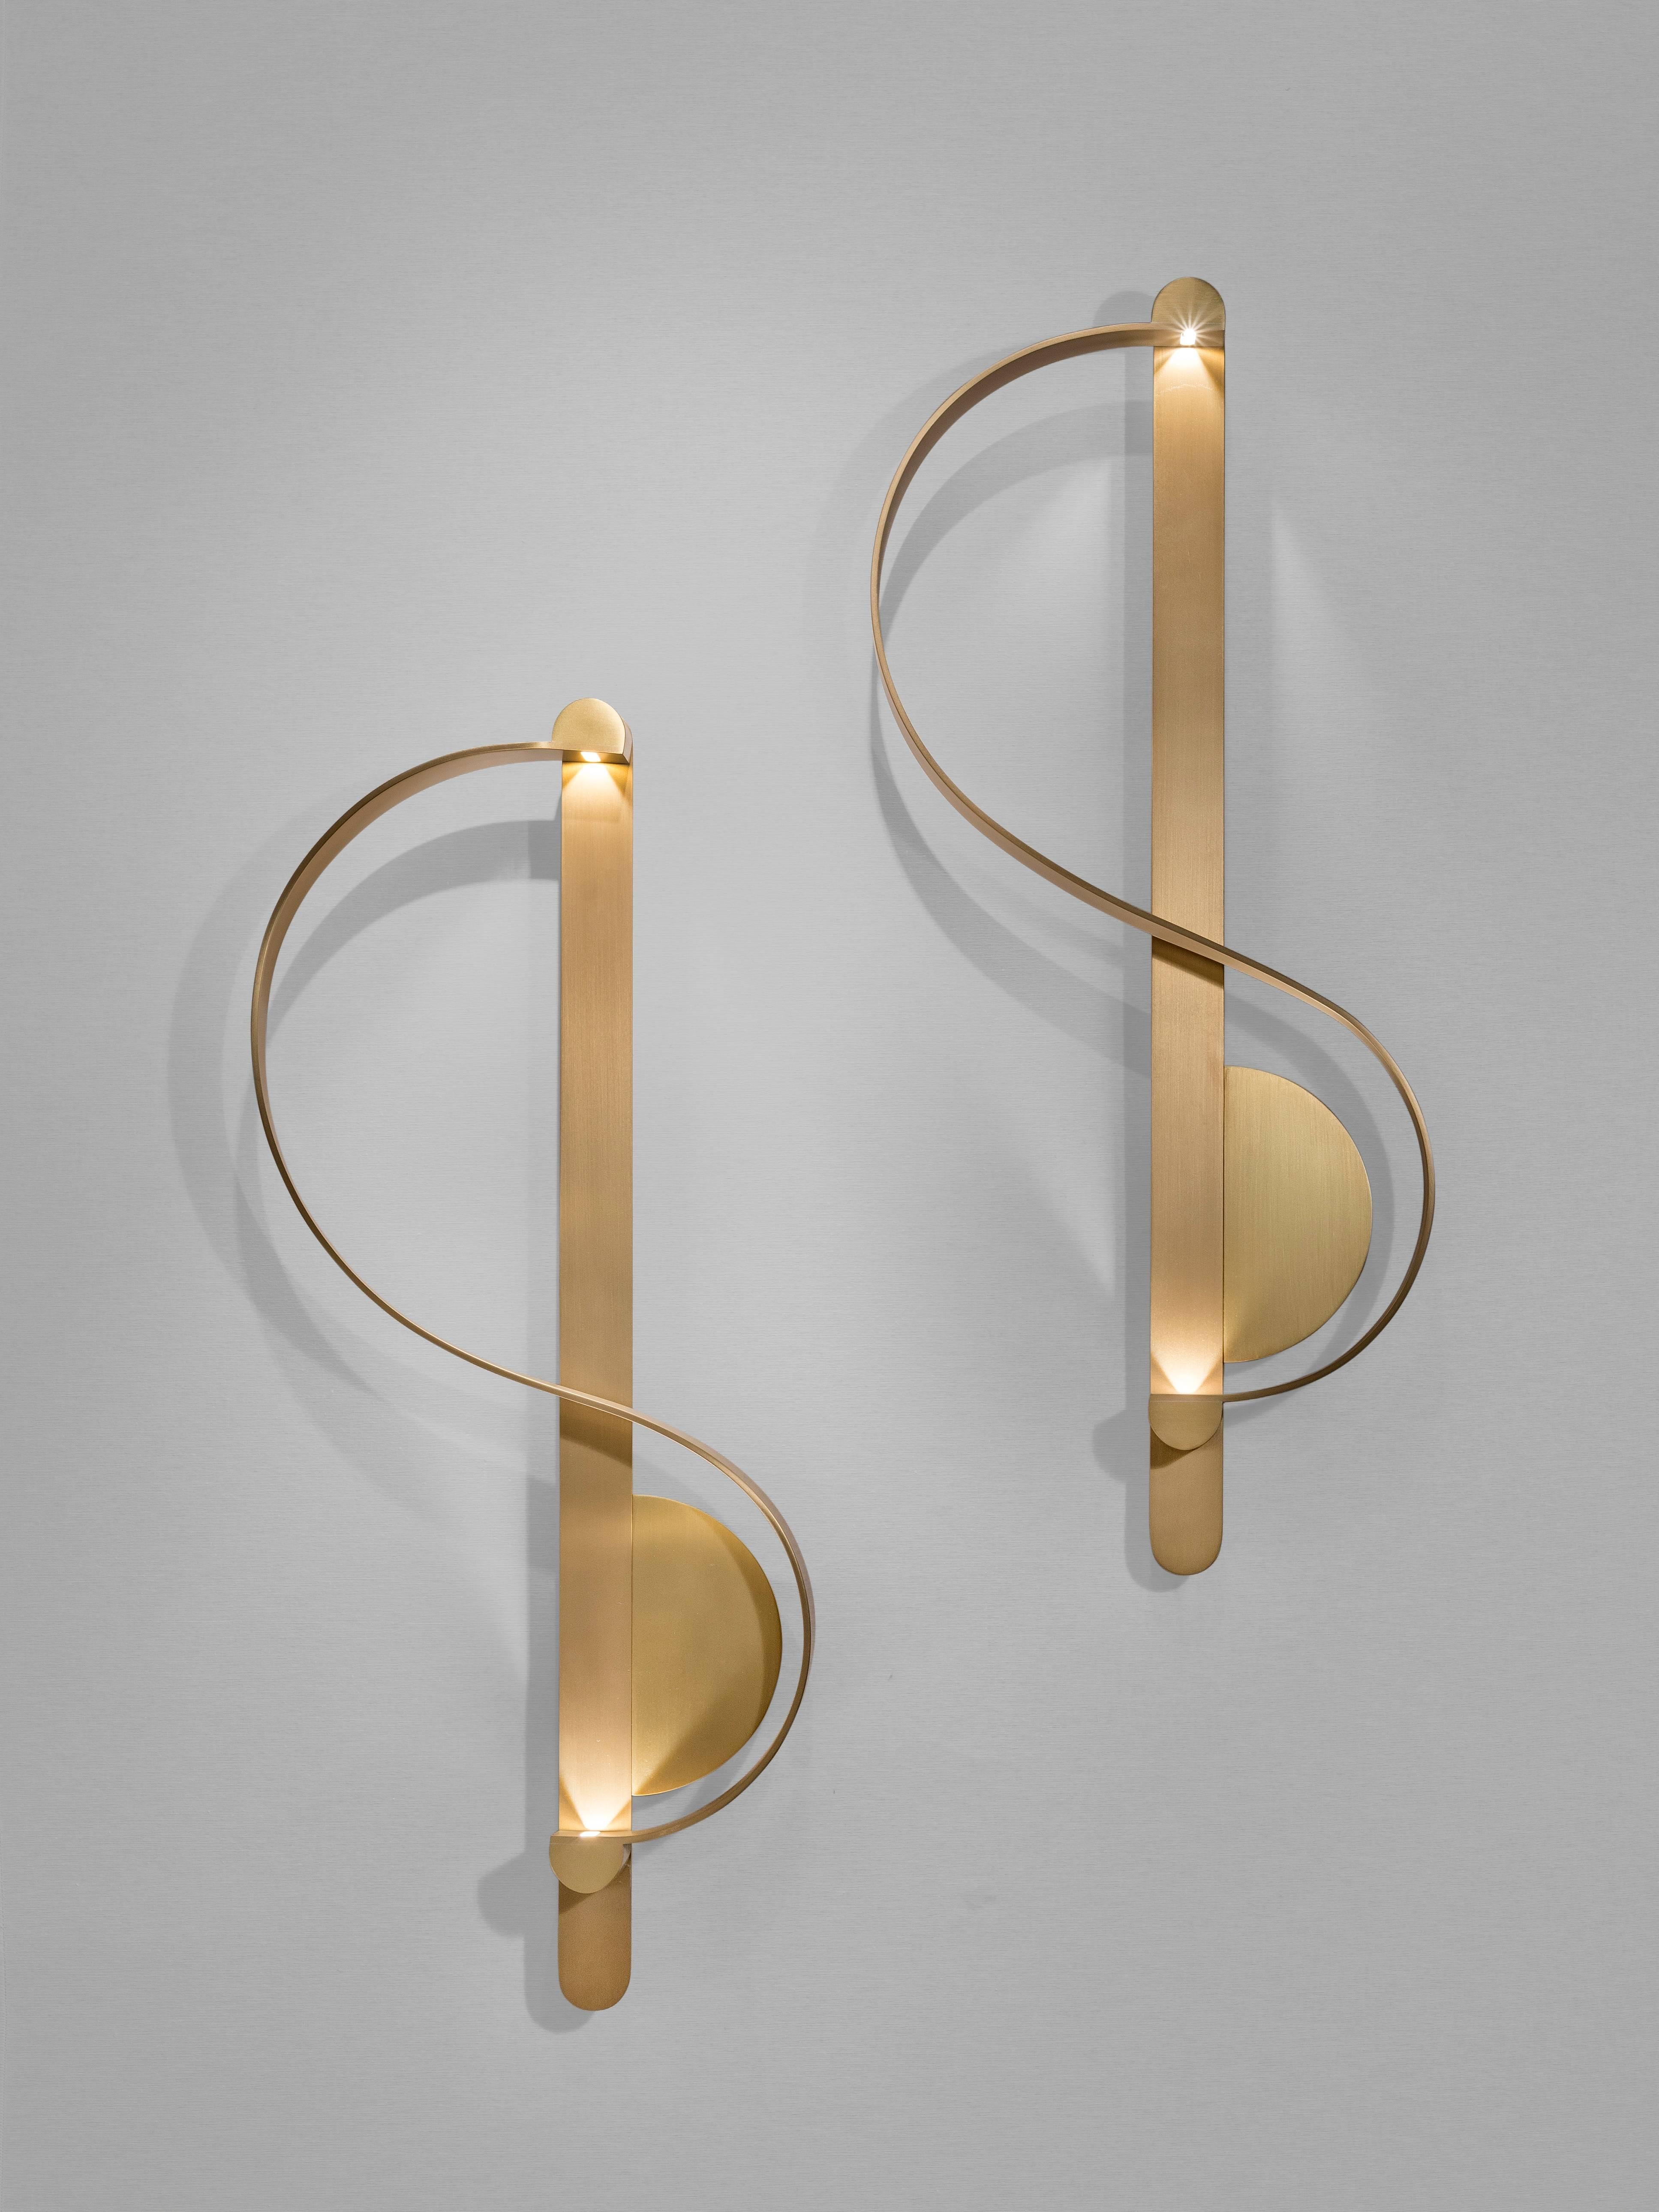 This pair of 'Clé De Sol' sculptural sconces by French-Lebanese Charles Kalpakian is produced entirely in gilded brushed brass. The design is inspired by the calligraphy of sheet music. In this wall light, the classic G Clef shape is transformed